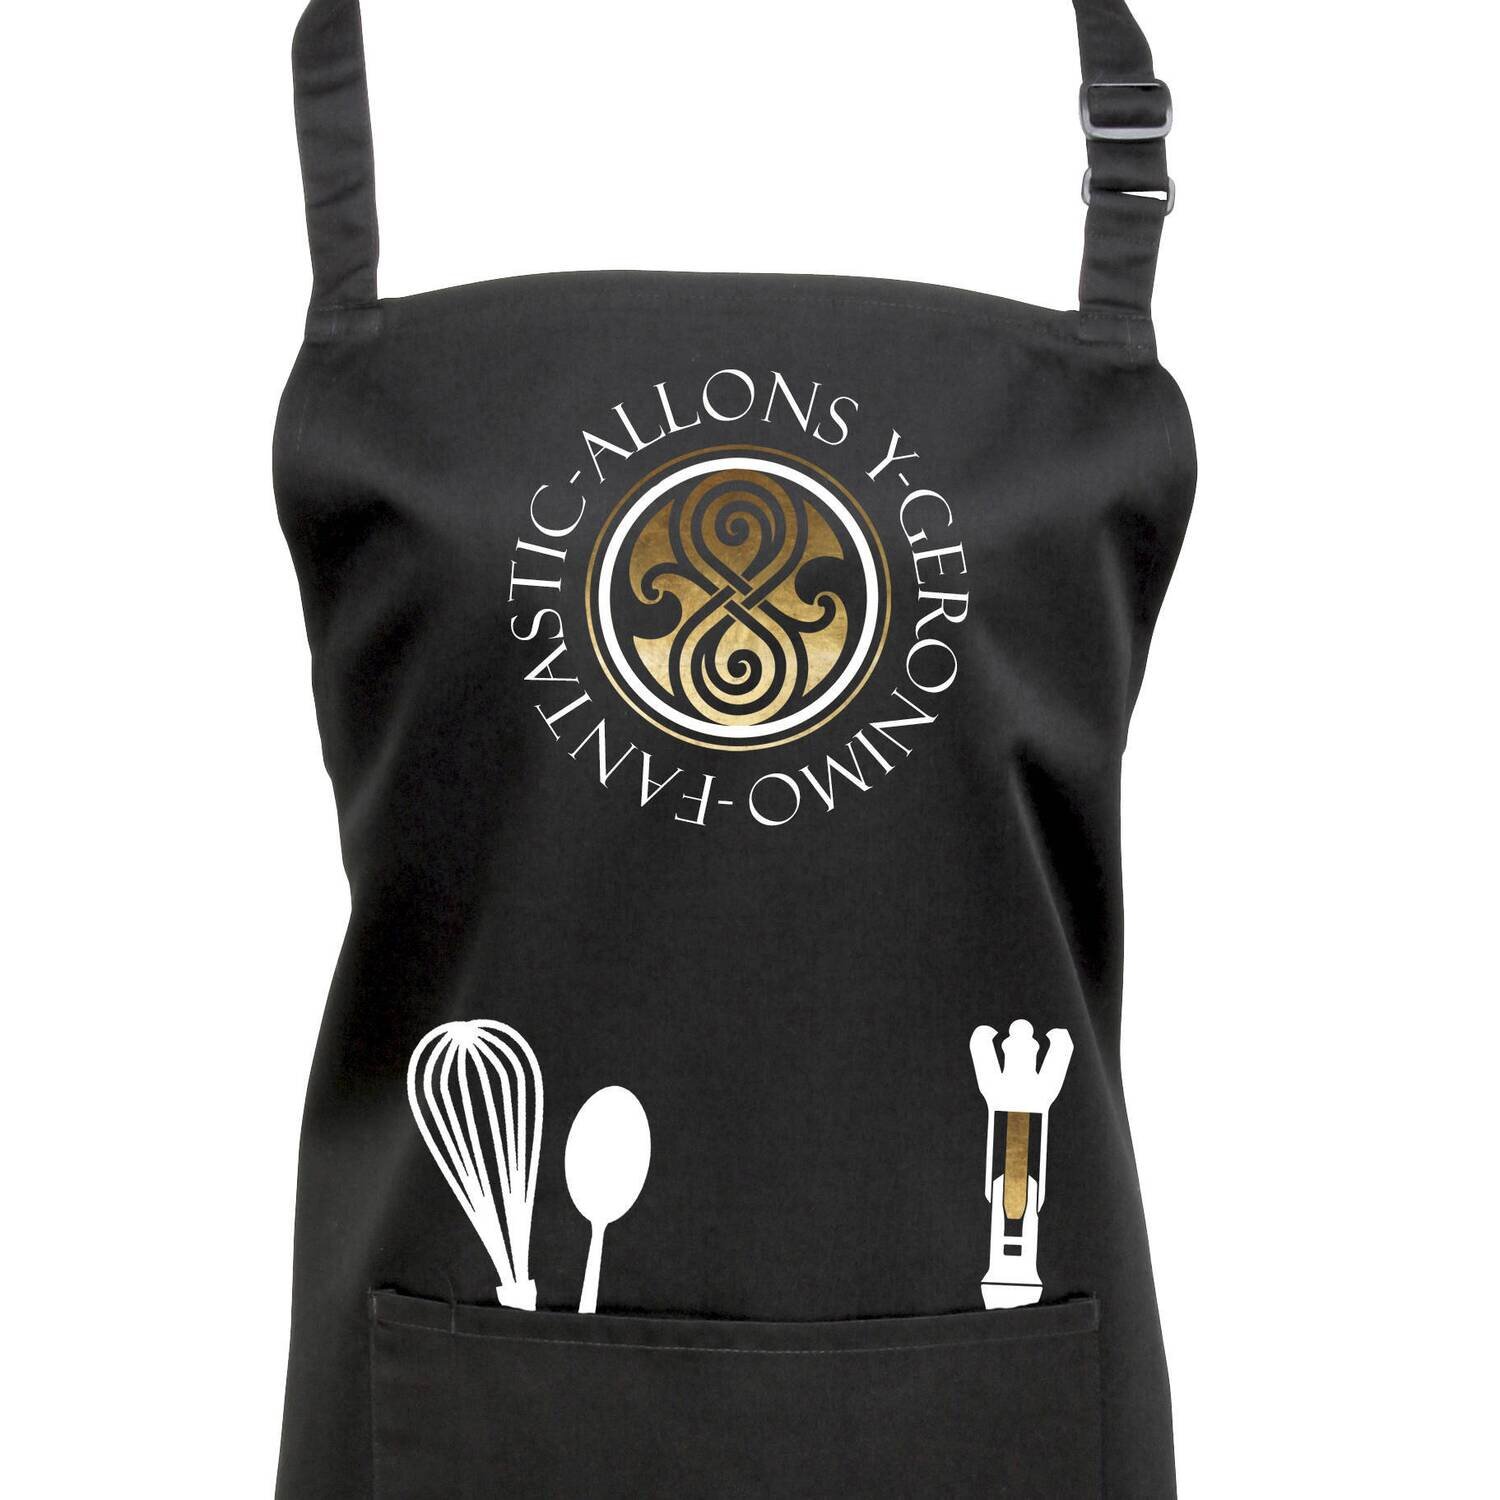 Doctor Who Time Lord Apron with Sonic Screwdriver.